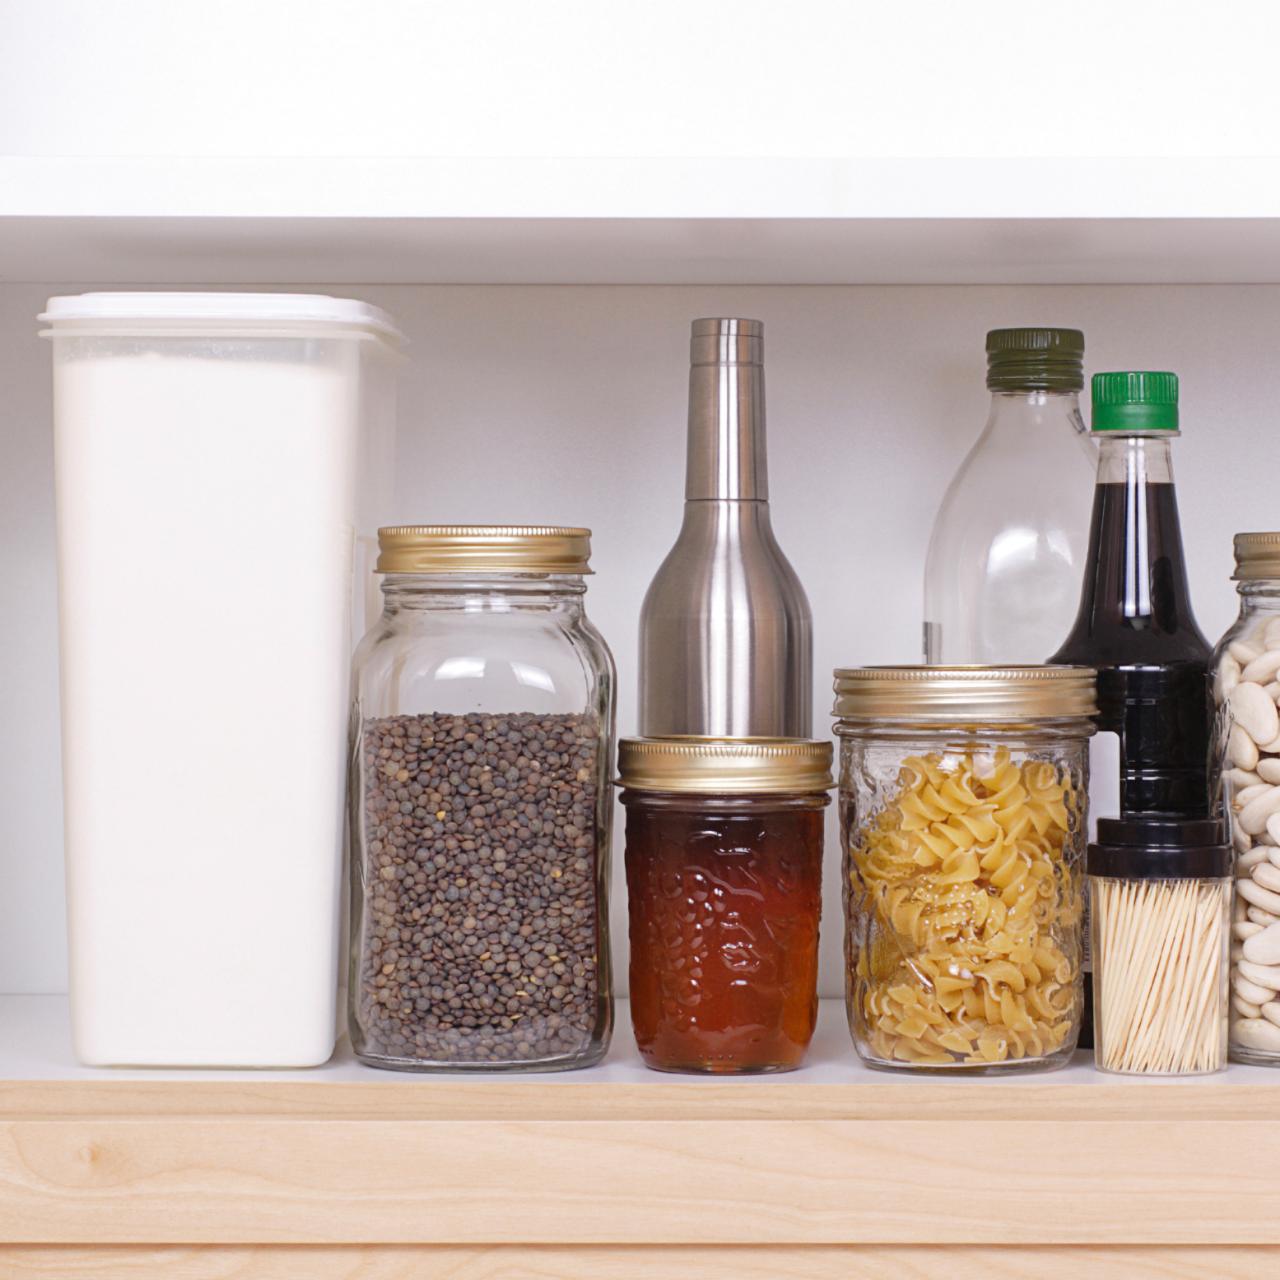 Low-cost pantry staples